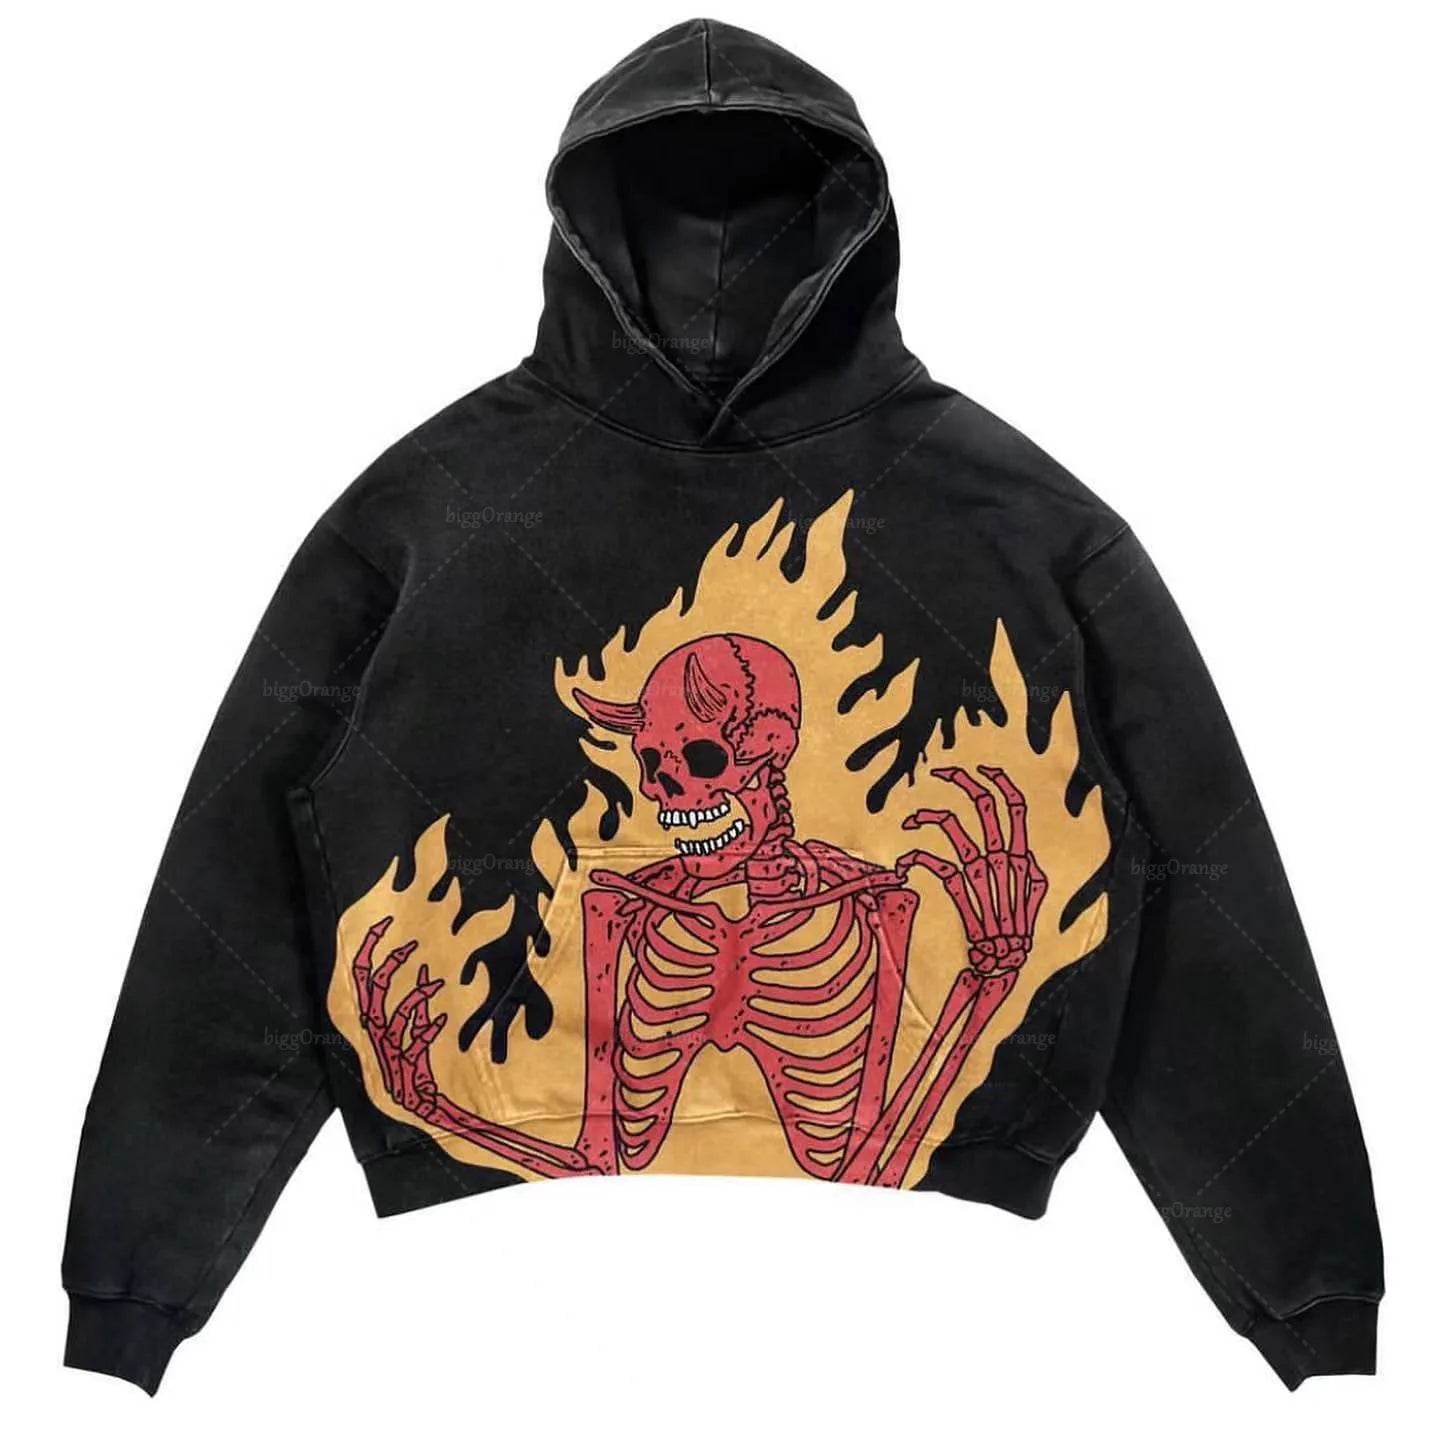 A black hoodie featuring a graphic of a red skeleton with horns and elongated fingers, set against a backdrop of flames. This Maramalive™ Explosions Printed Skull Y2K Retro Hooded Sweater Coat Street Style Gothic Casual Fashion Hooded Sweater Men's Female exudes bold, edgy vibes perfect for those who dare to stand out.